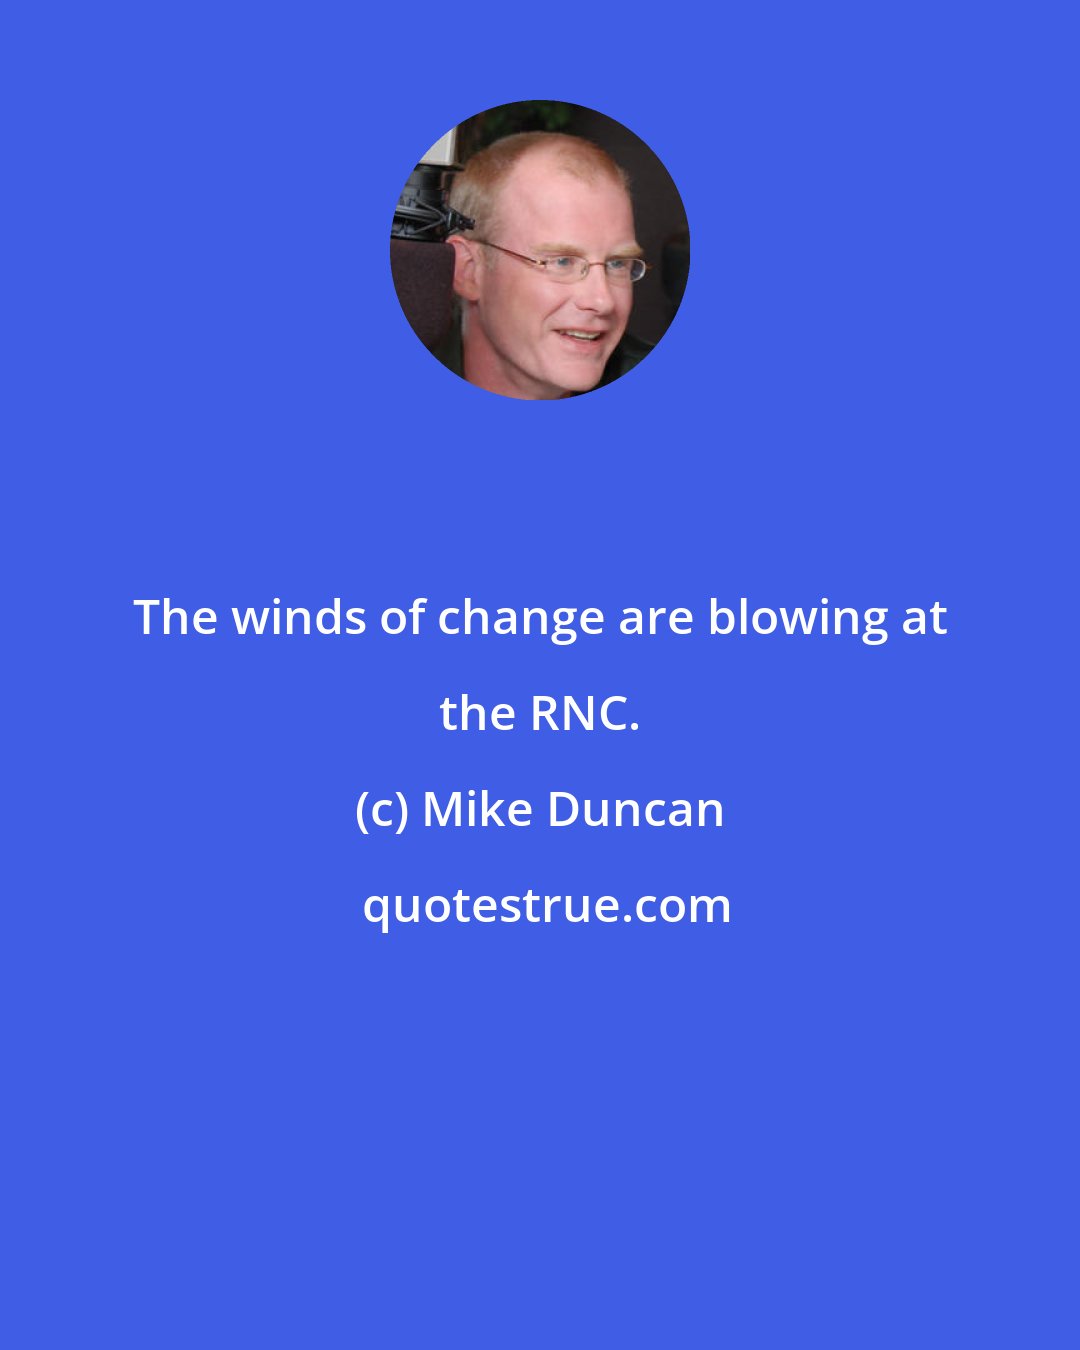 Mike Duncan: The winds of change are blowing at the RNC.